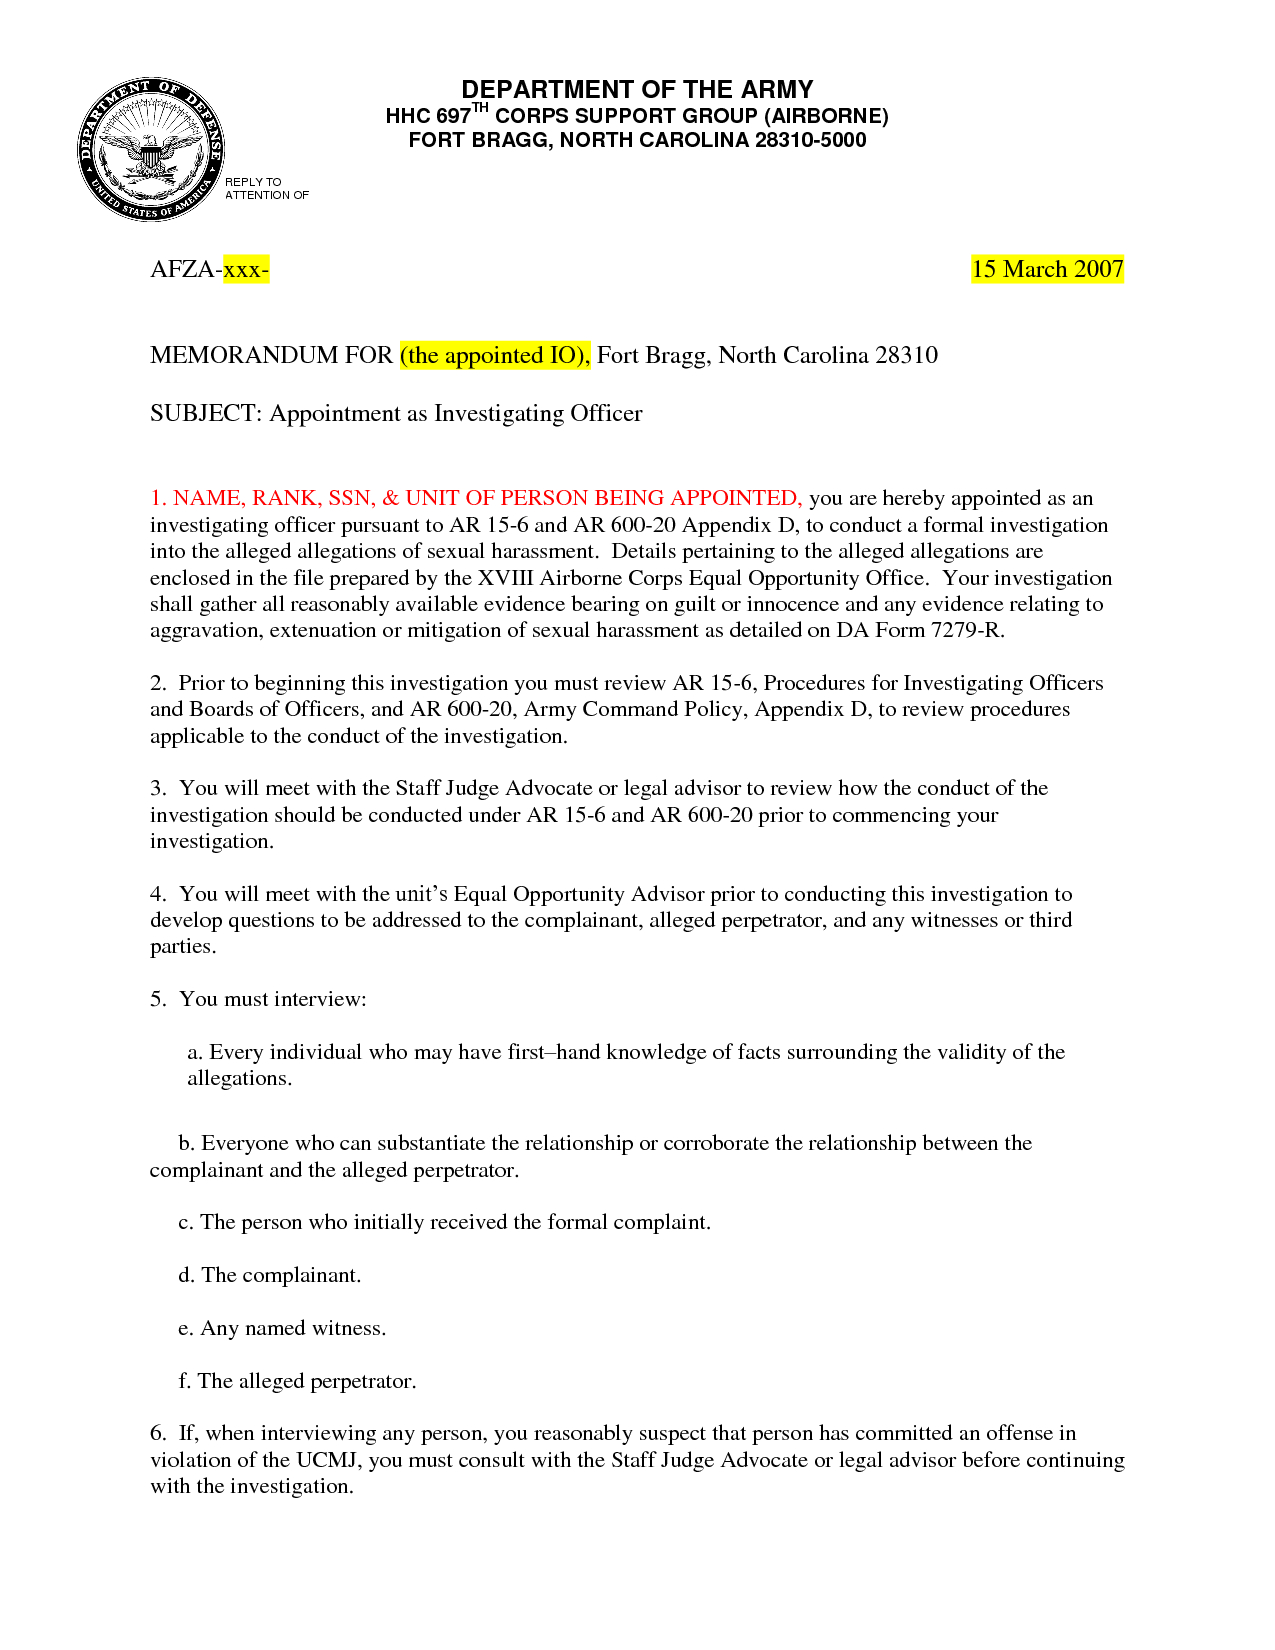 Army Memo Example Template | Free Cover Letter Templates For Army Memorandum Template Word